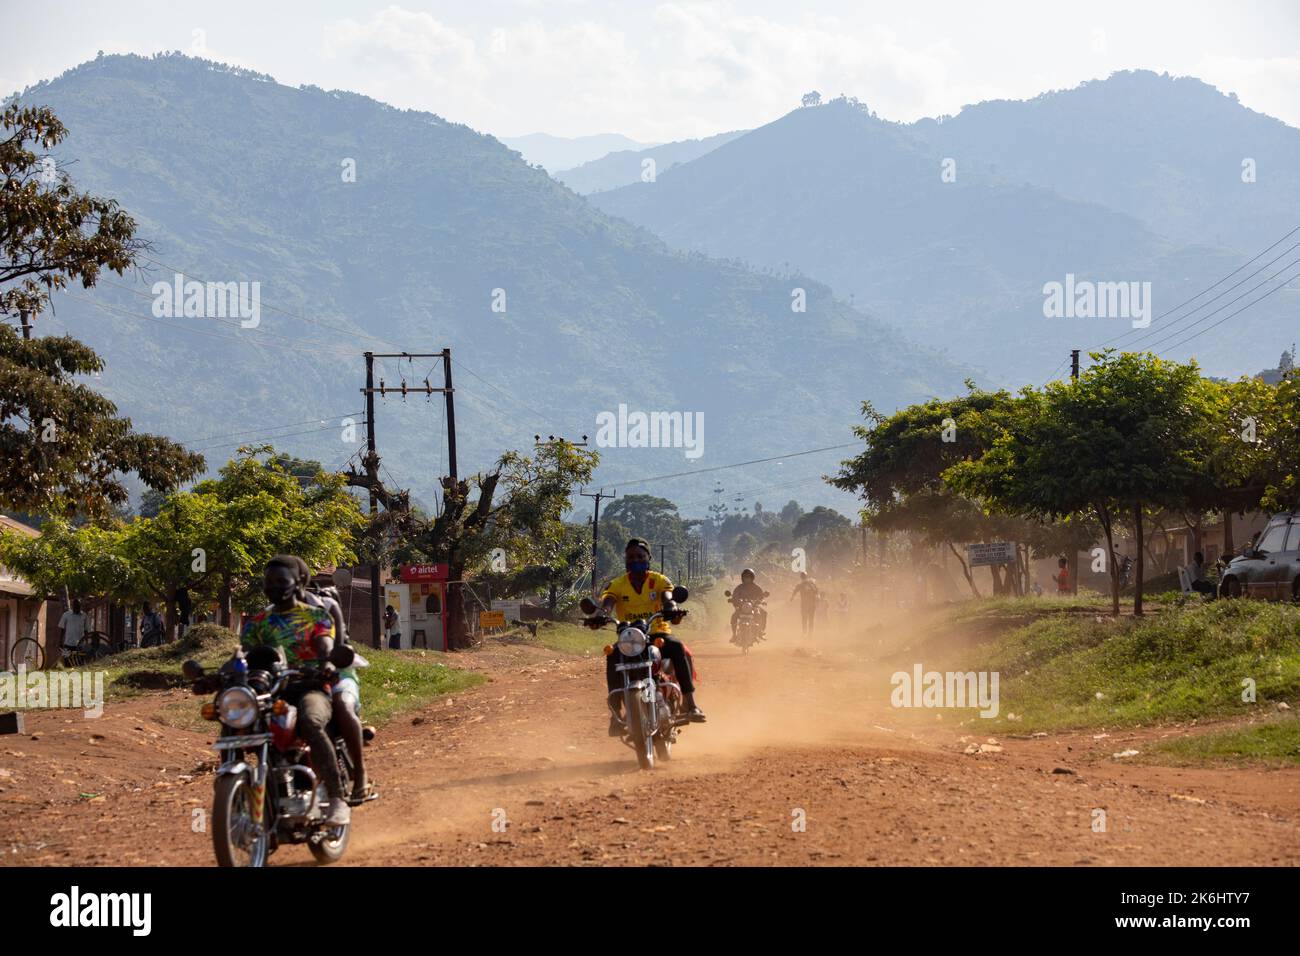 Small town along a dirt road through the Rwenzori Mountains in Kasese, Uganda, East Africa. Stock Photo